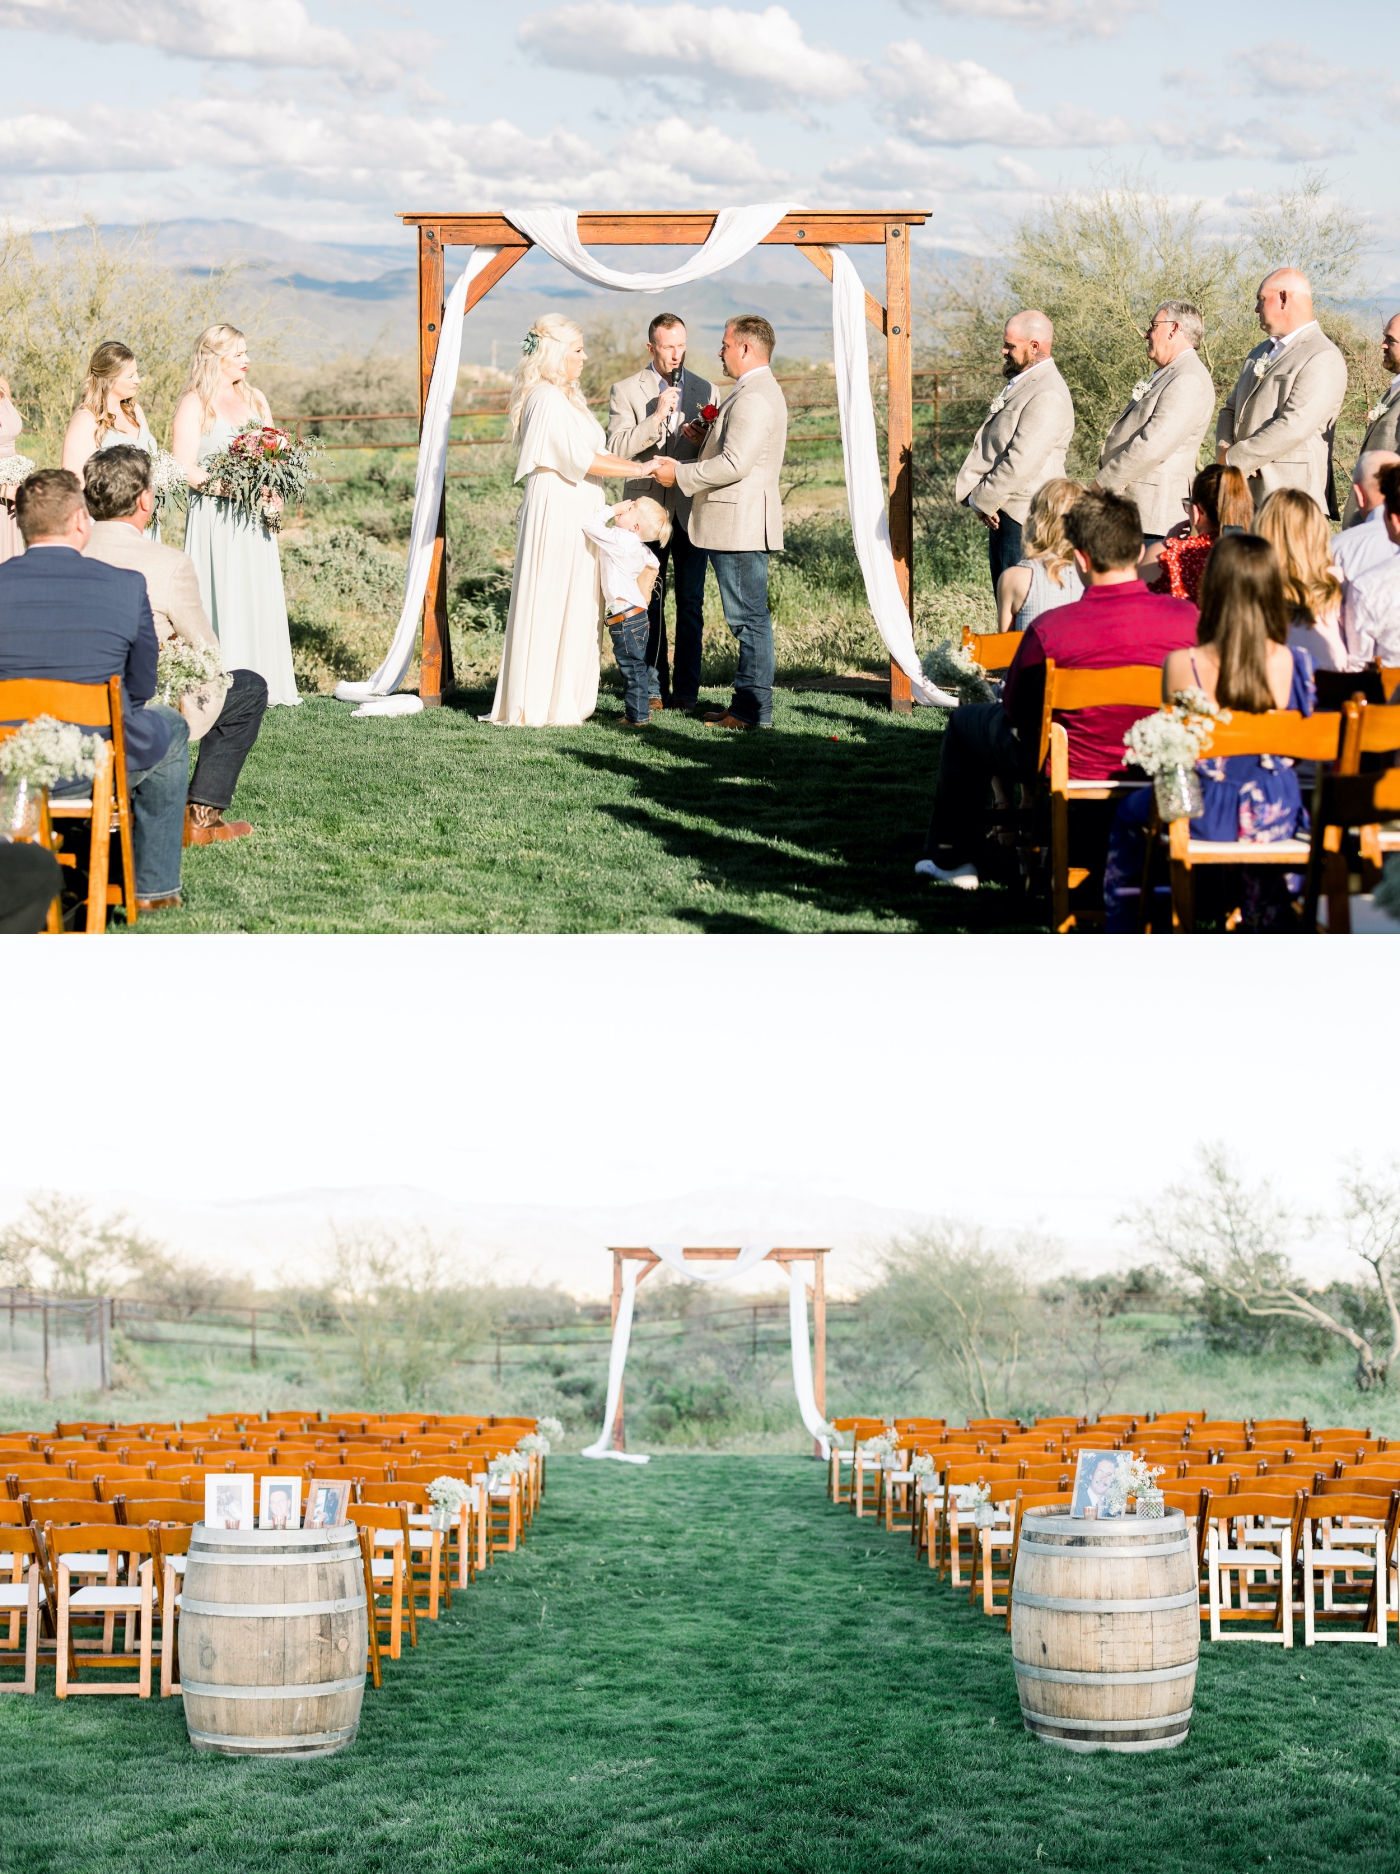 How to plan a desert wedding with bohemian style